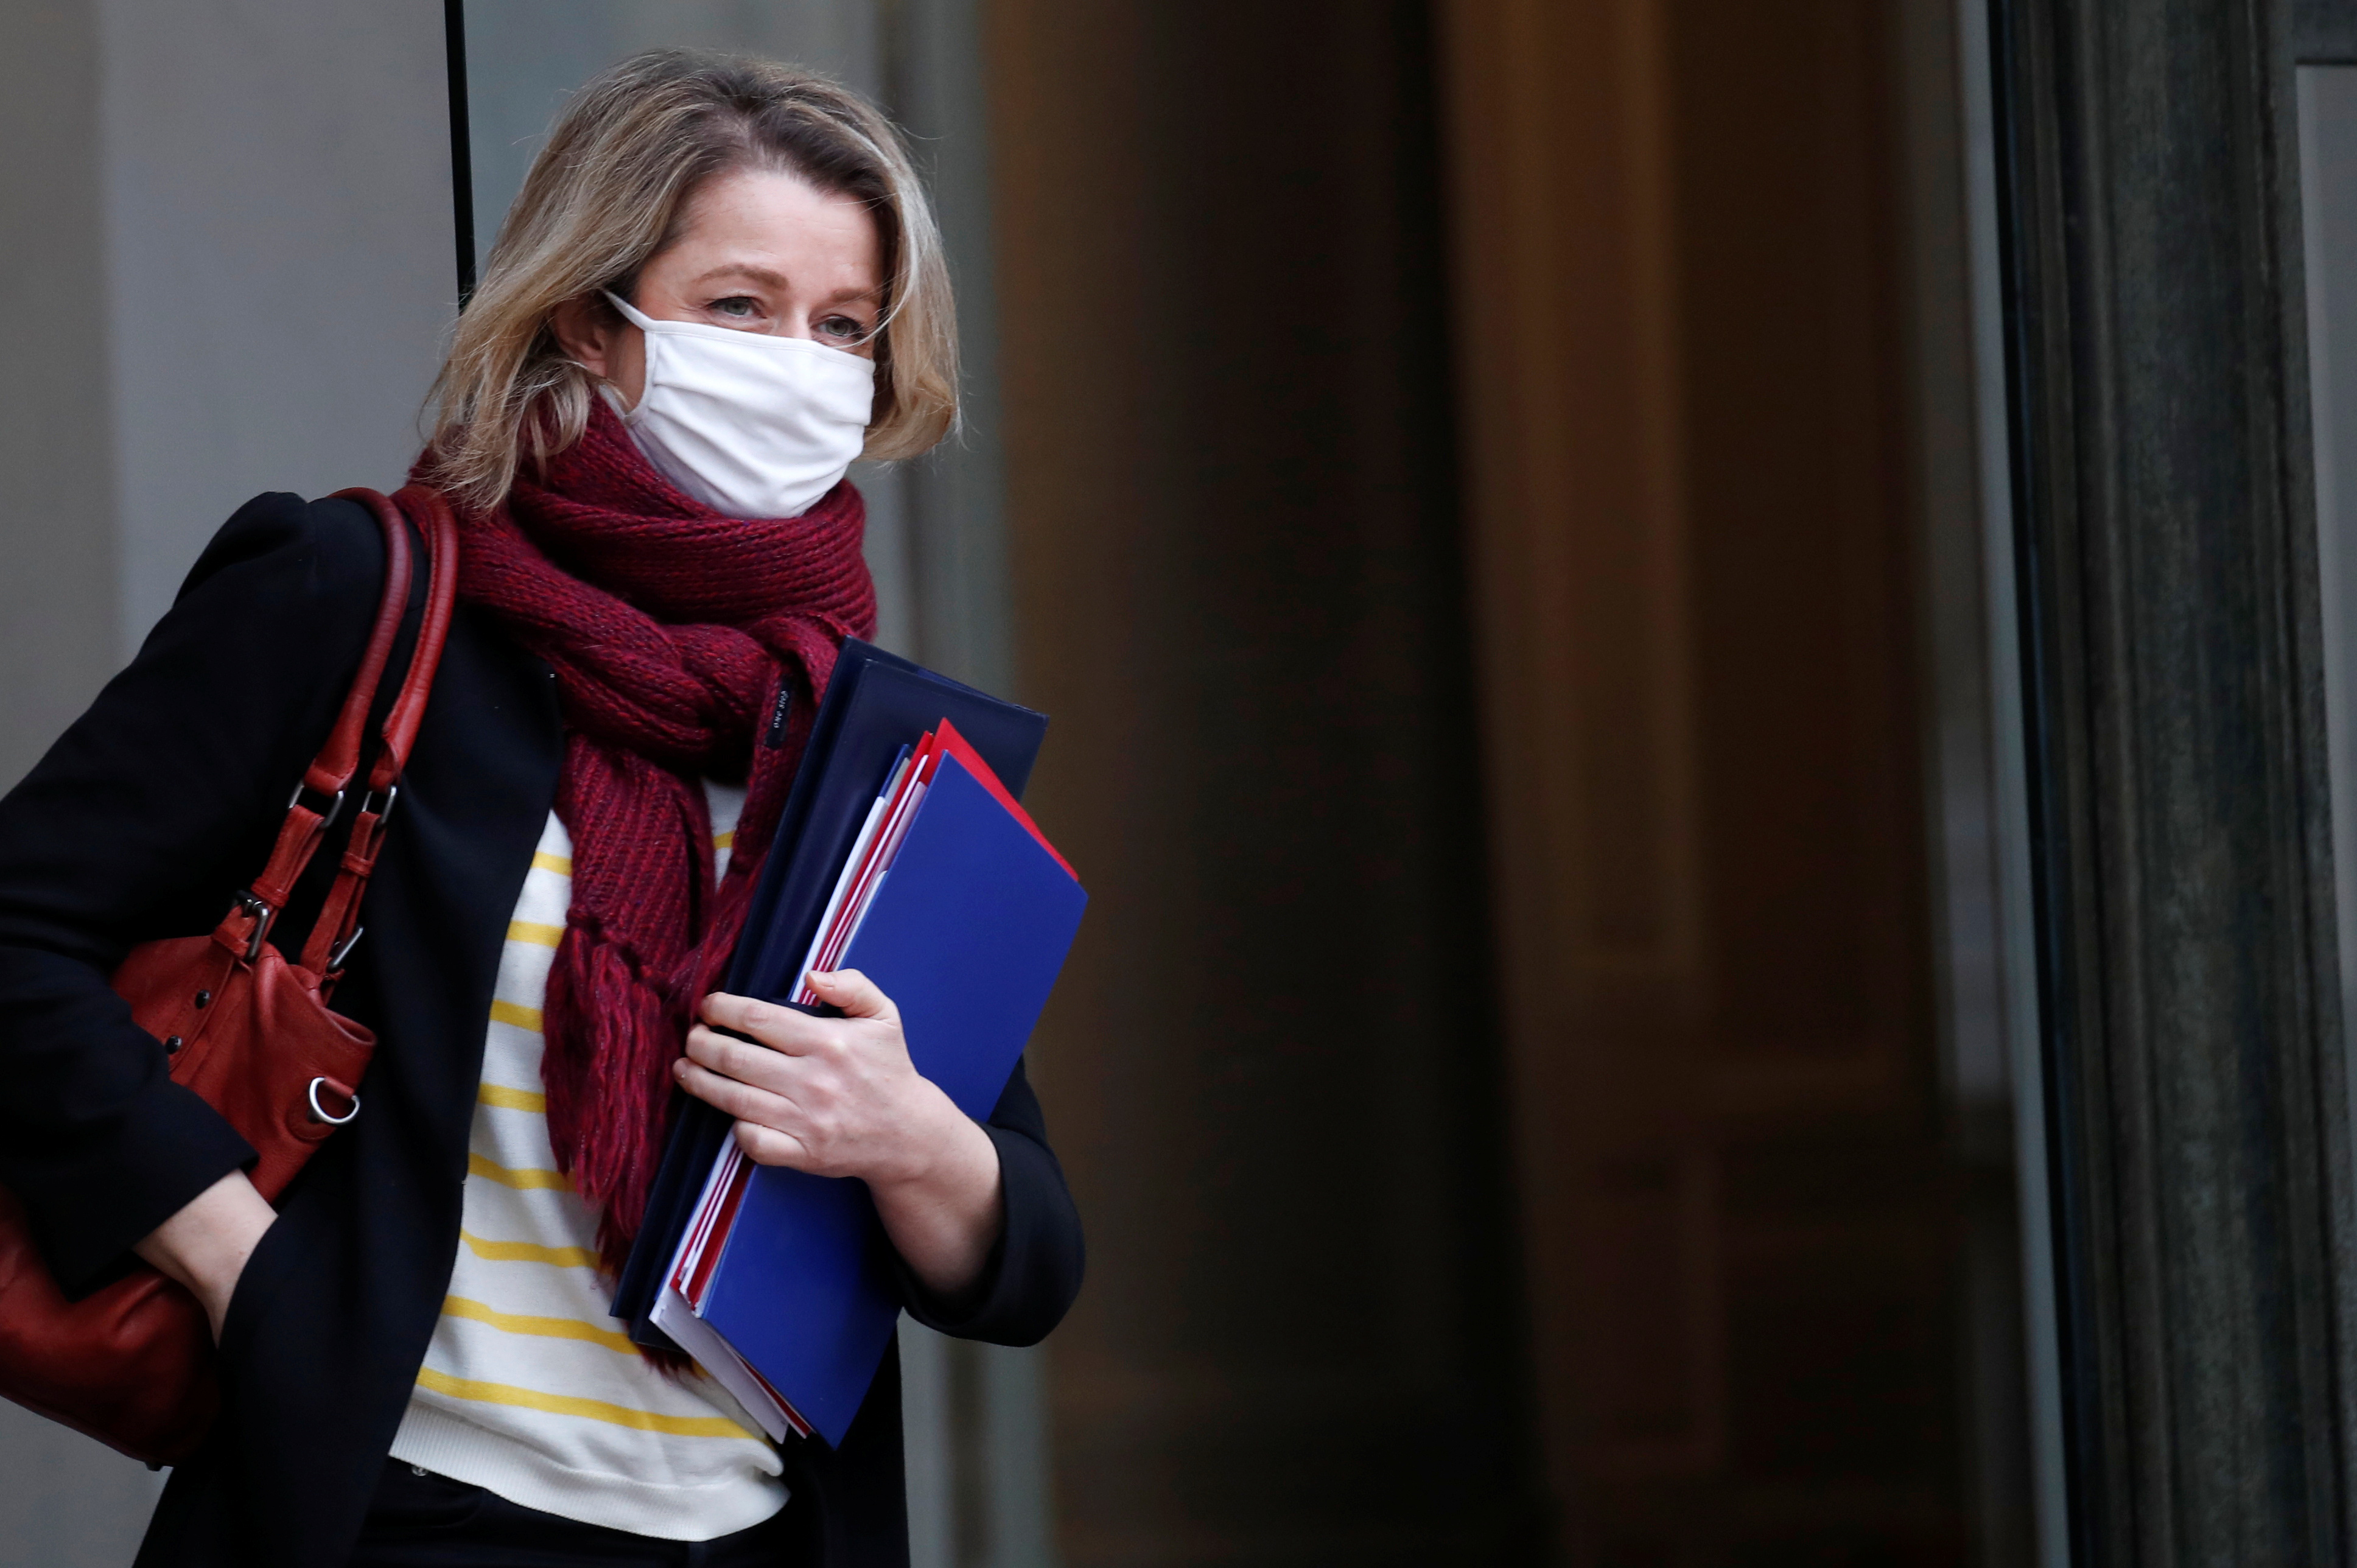 French Ecological Transition Minister Barbara Pompili, wearing a protective face mask, leaves following the weekly cabinet meeting at the Elysee Palace in Paris, France January 27, 2021. REUTERS/Gonzalo Fuentes